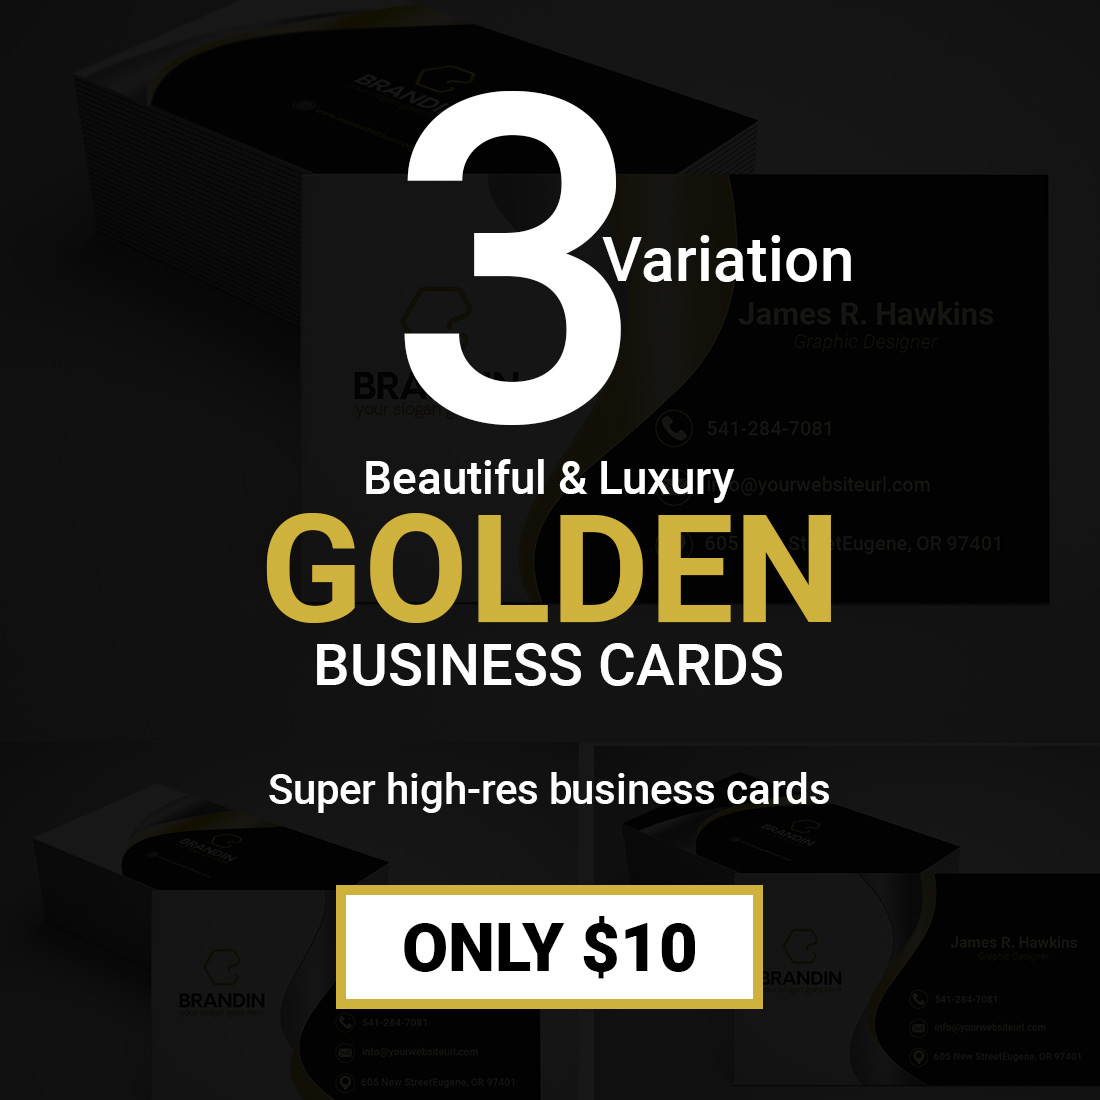 3 in 1 modern & Luxury golden business card bundles cover image.